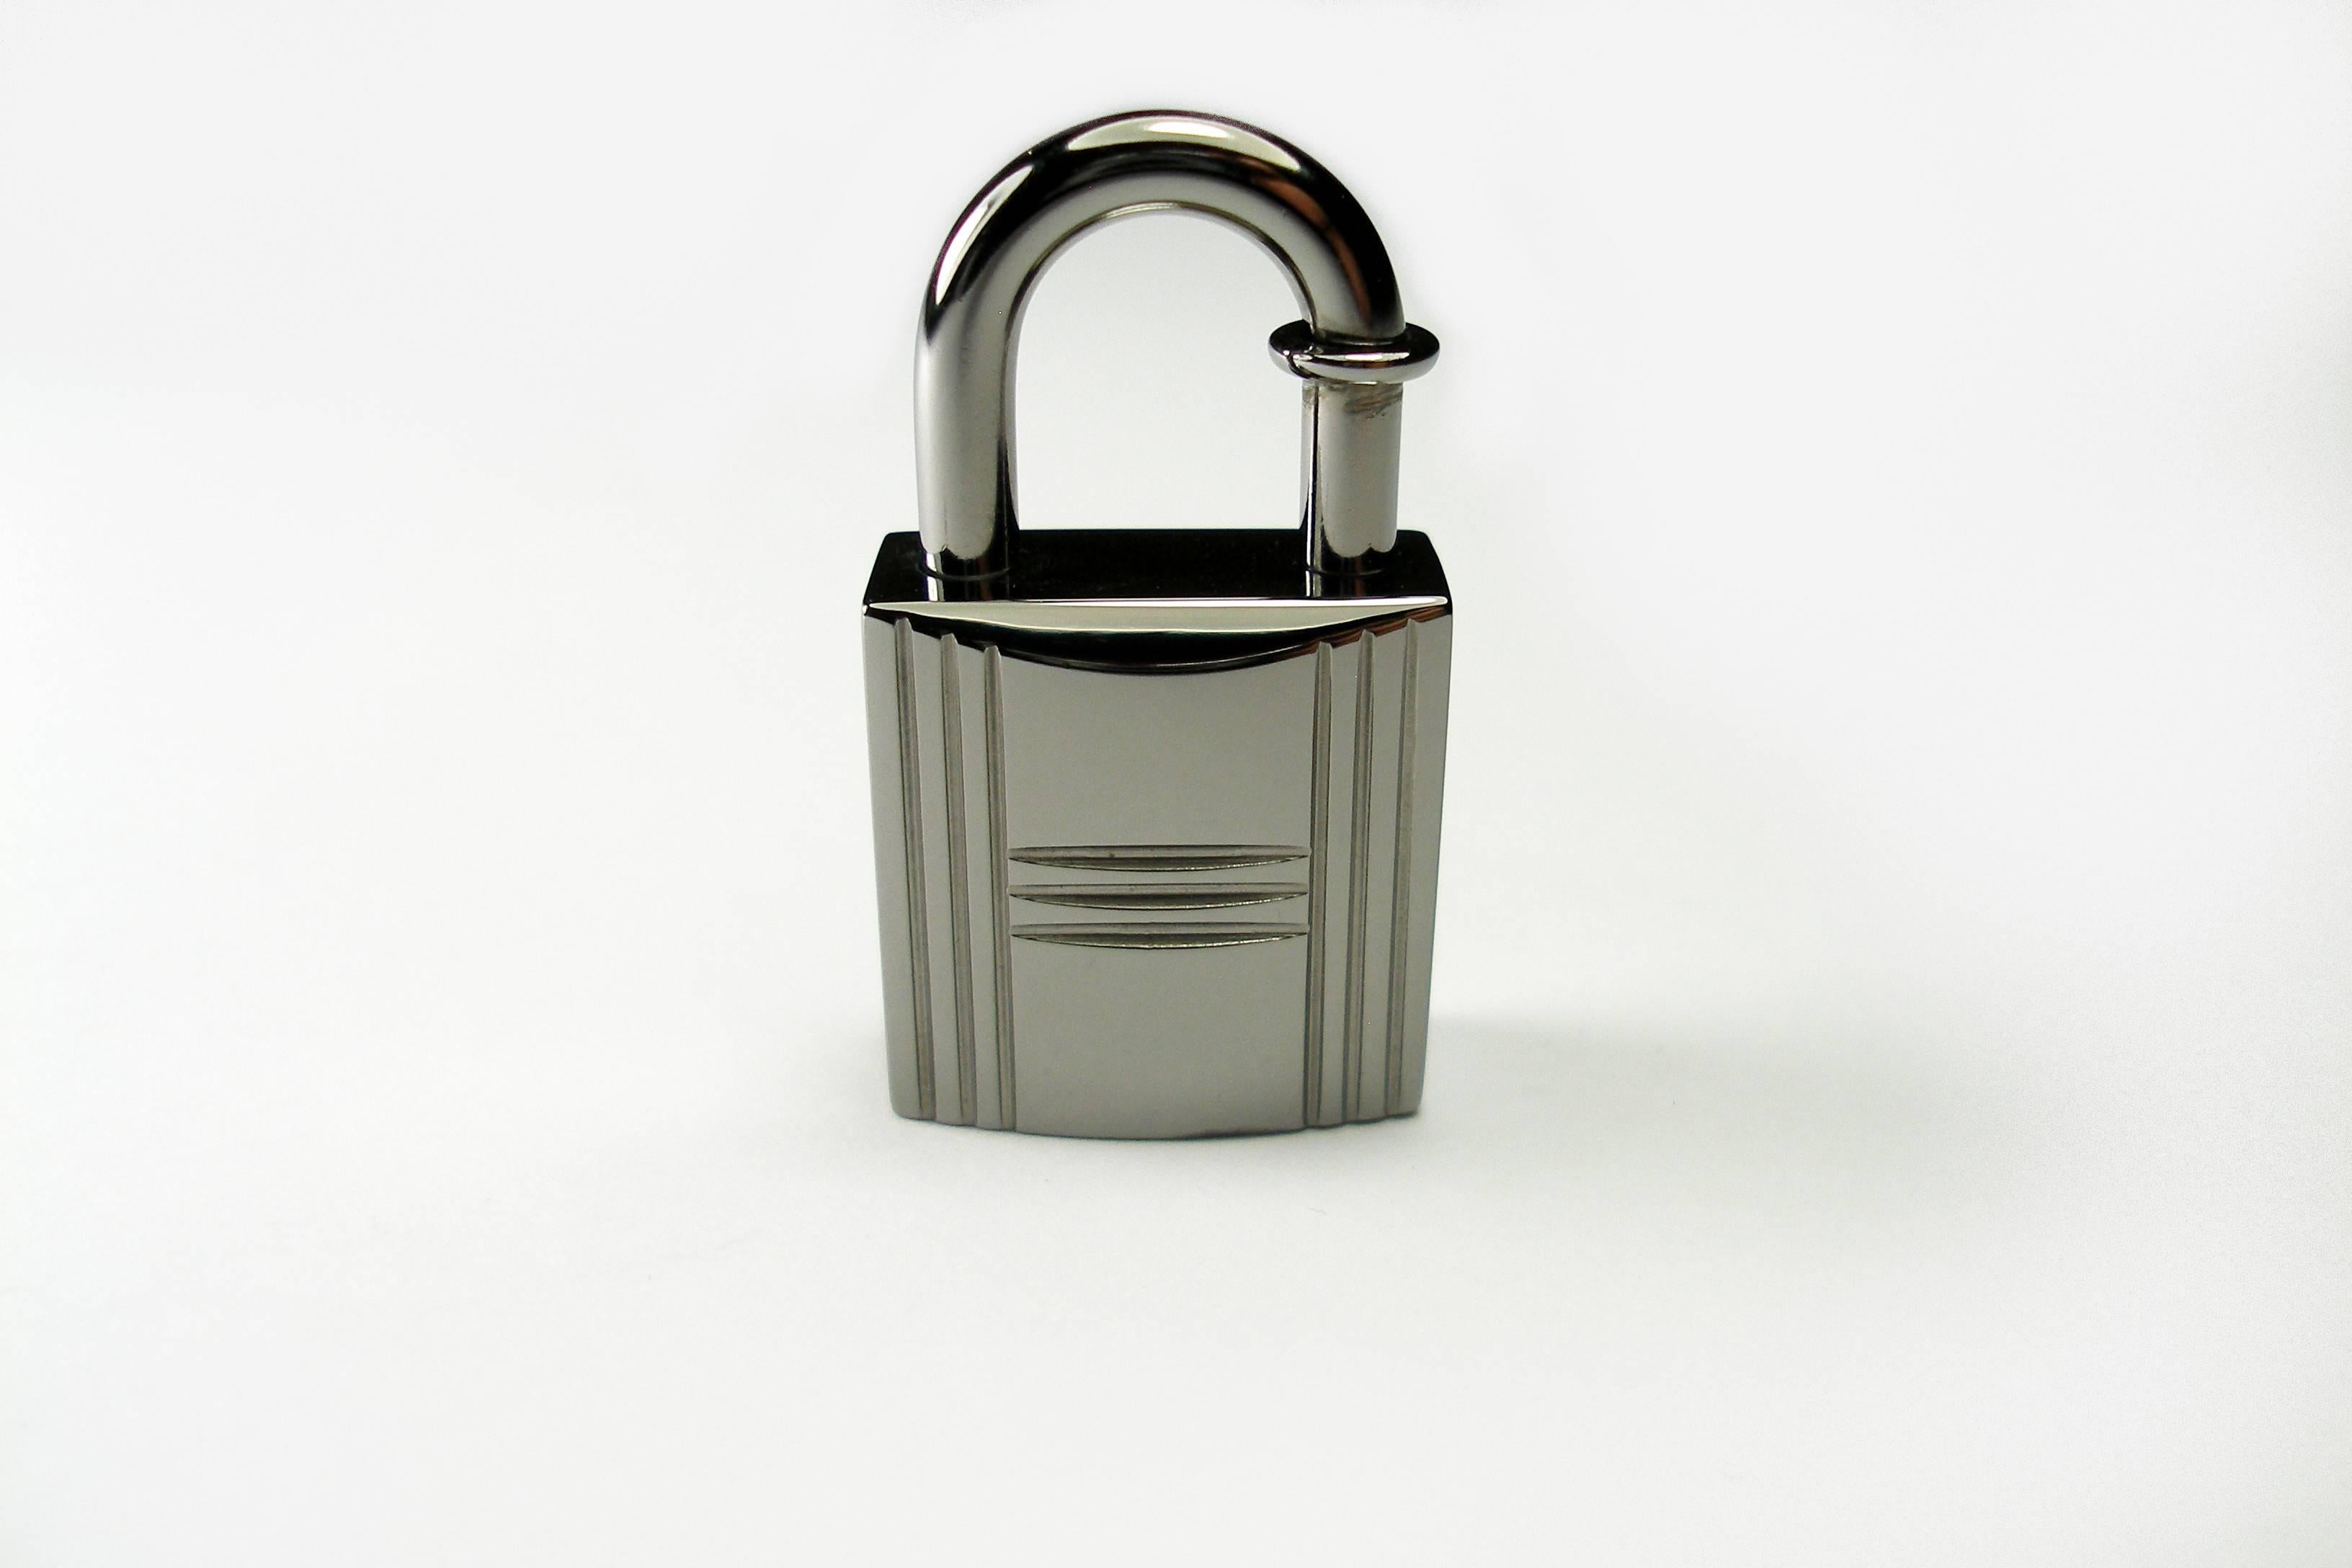 VERY RARE Ruthenium Hermès Cadenas lock Charm
Dimensions : 2 X 2 cm 
BRAND NEW 
Its comes with Hermès shopping bag and ribbon 
INTERNATIONALS BUYERS CUSTOMS DUTIES AND TAXES ARE INCLUDED
Thank you for visiting my shop !